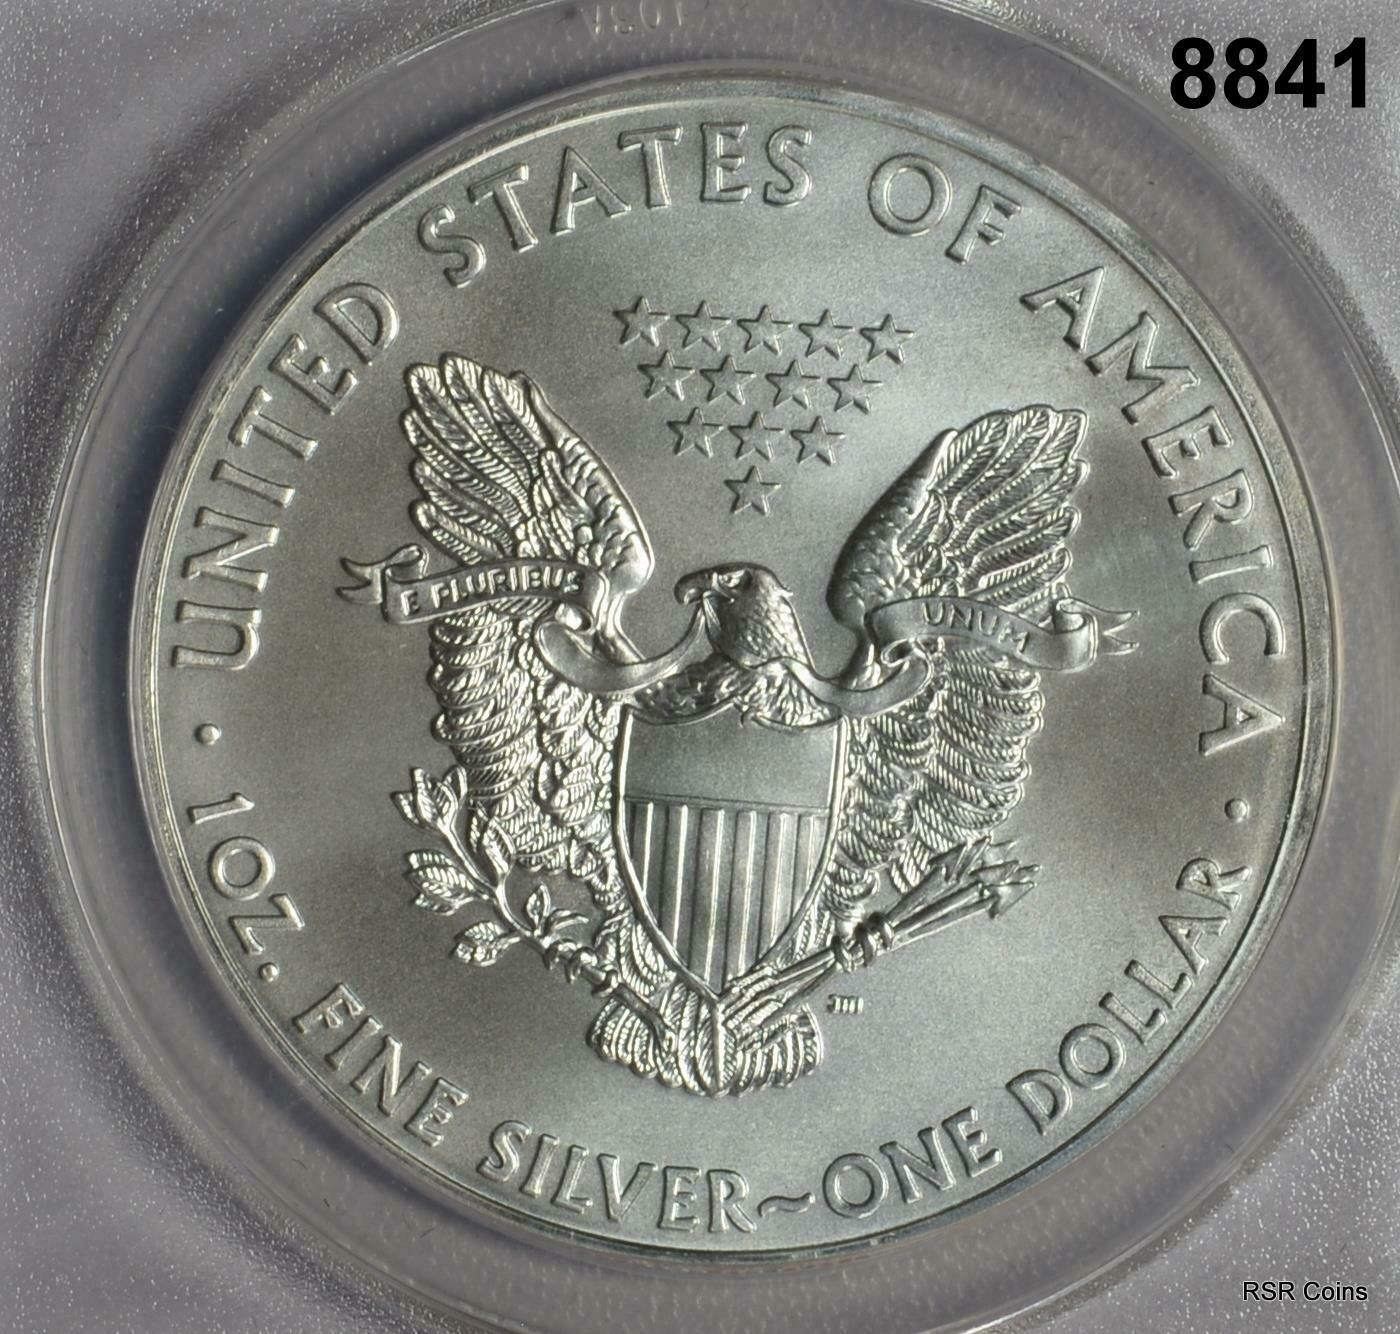 2010 & 2011 ANACS CERTIFIED SILVER EAGLE 2 COIN SET #8841